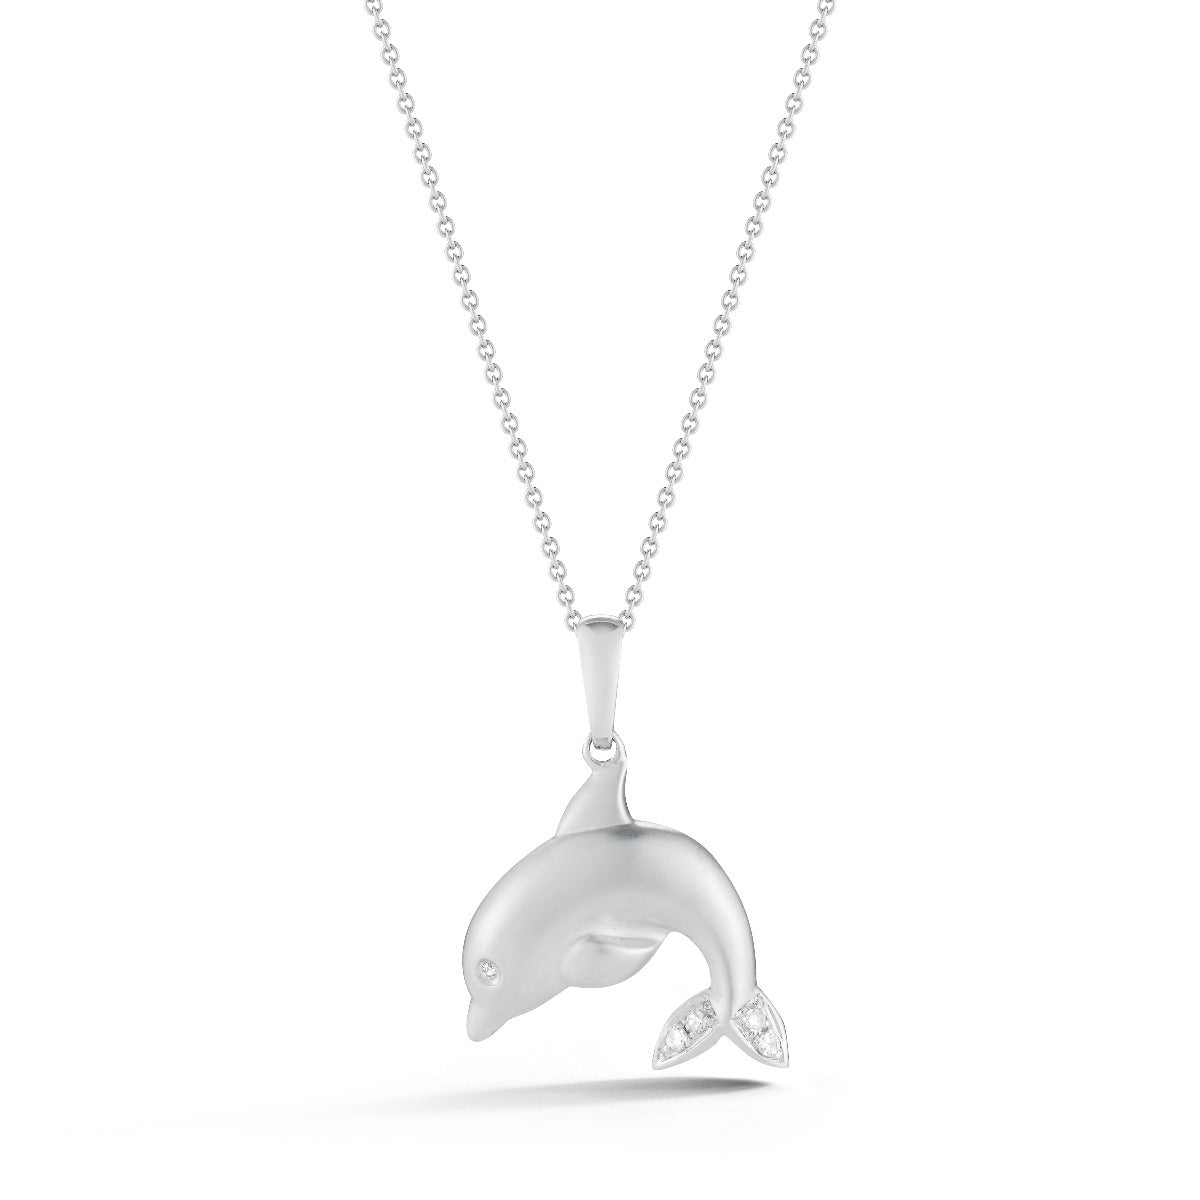 14K DOLPHIN PENDANT WITH CHAIN, 5 DIAMONDS TOTAL WEIGHT 0.045CT. 3/4" LONG